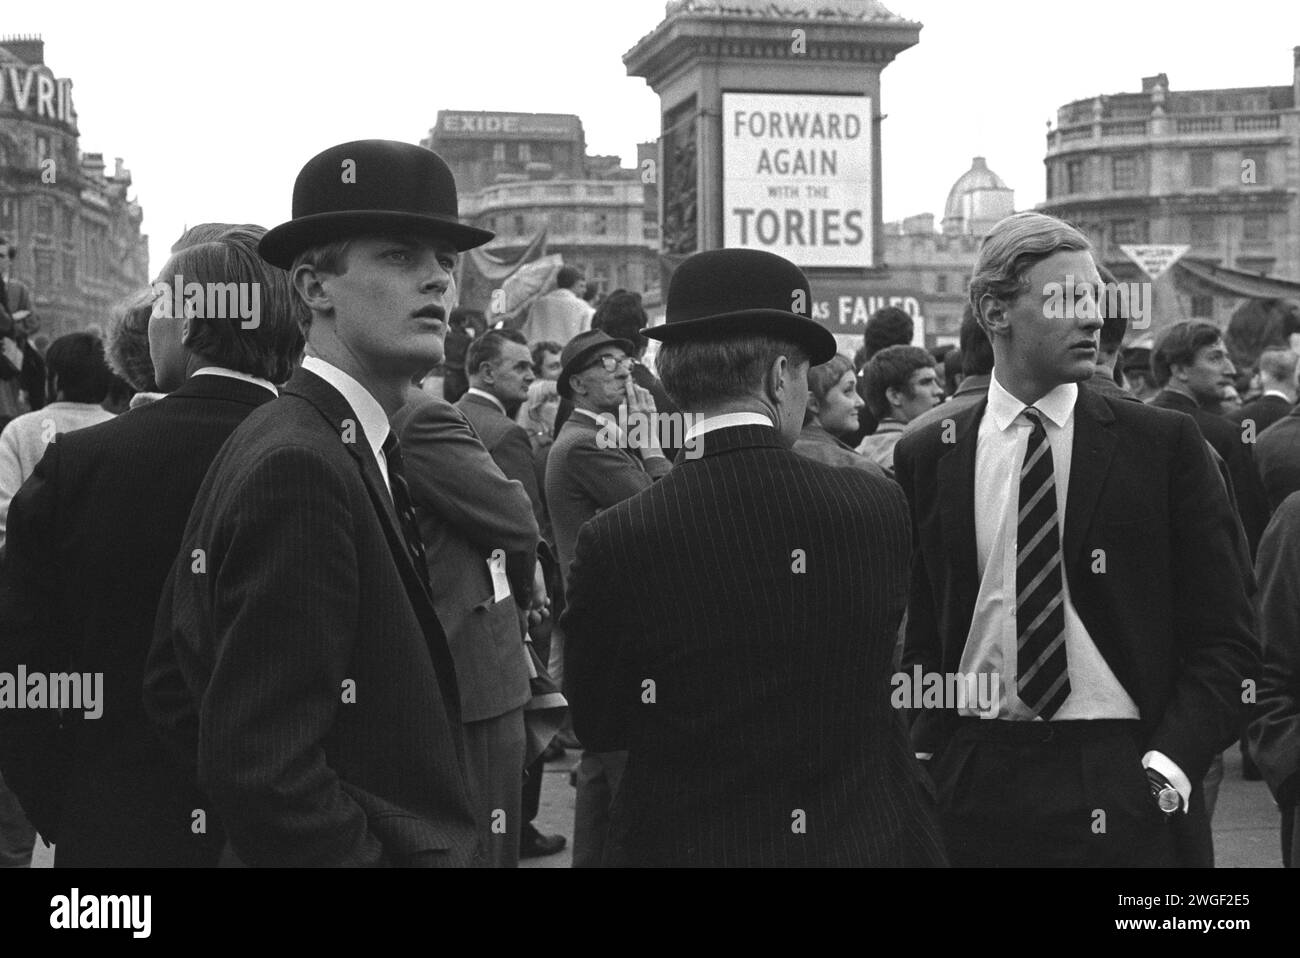 Young Conservatives, at political rally Trafalgar Square, London 1960s UK.  Bowler hatted, suited and wearing their old school ties, four young  ‘City Gents’ attend a Conservative Party ‘Forward Again with the Tories’ rally in the run up to the 1970 General Election. England 1969. HOMER SYKES Stock Photo